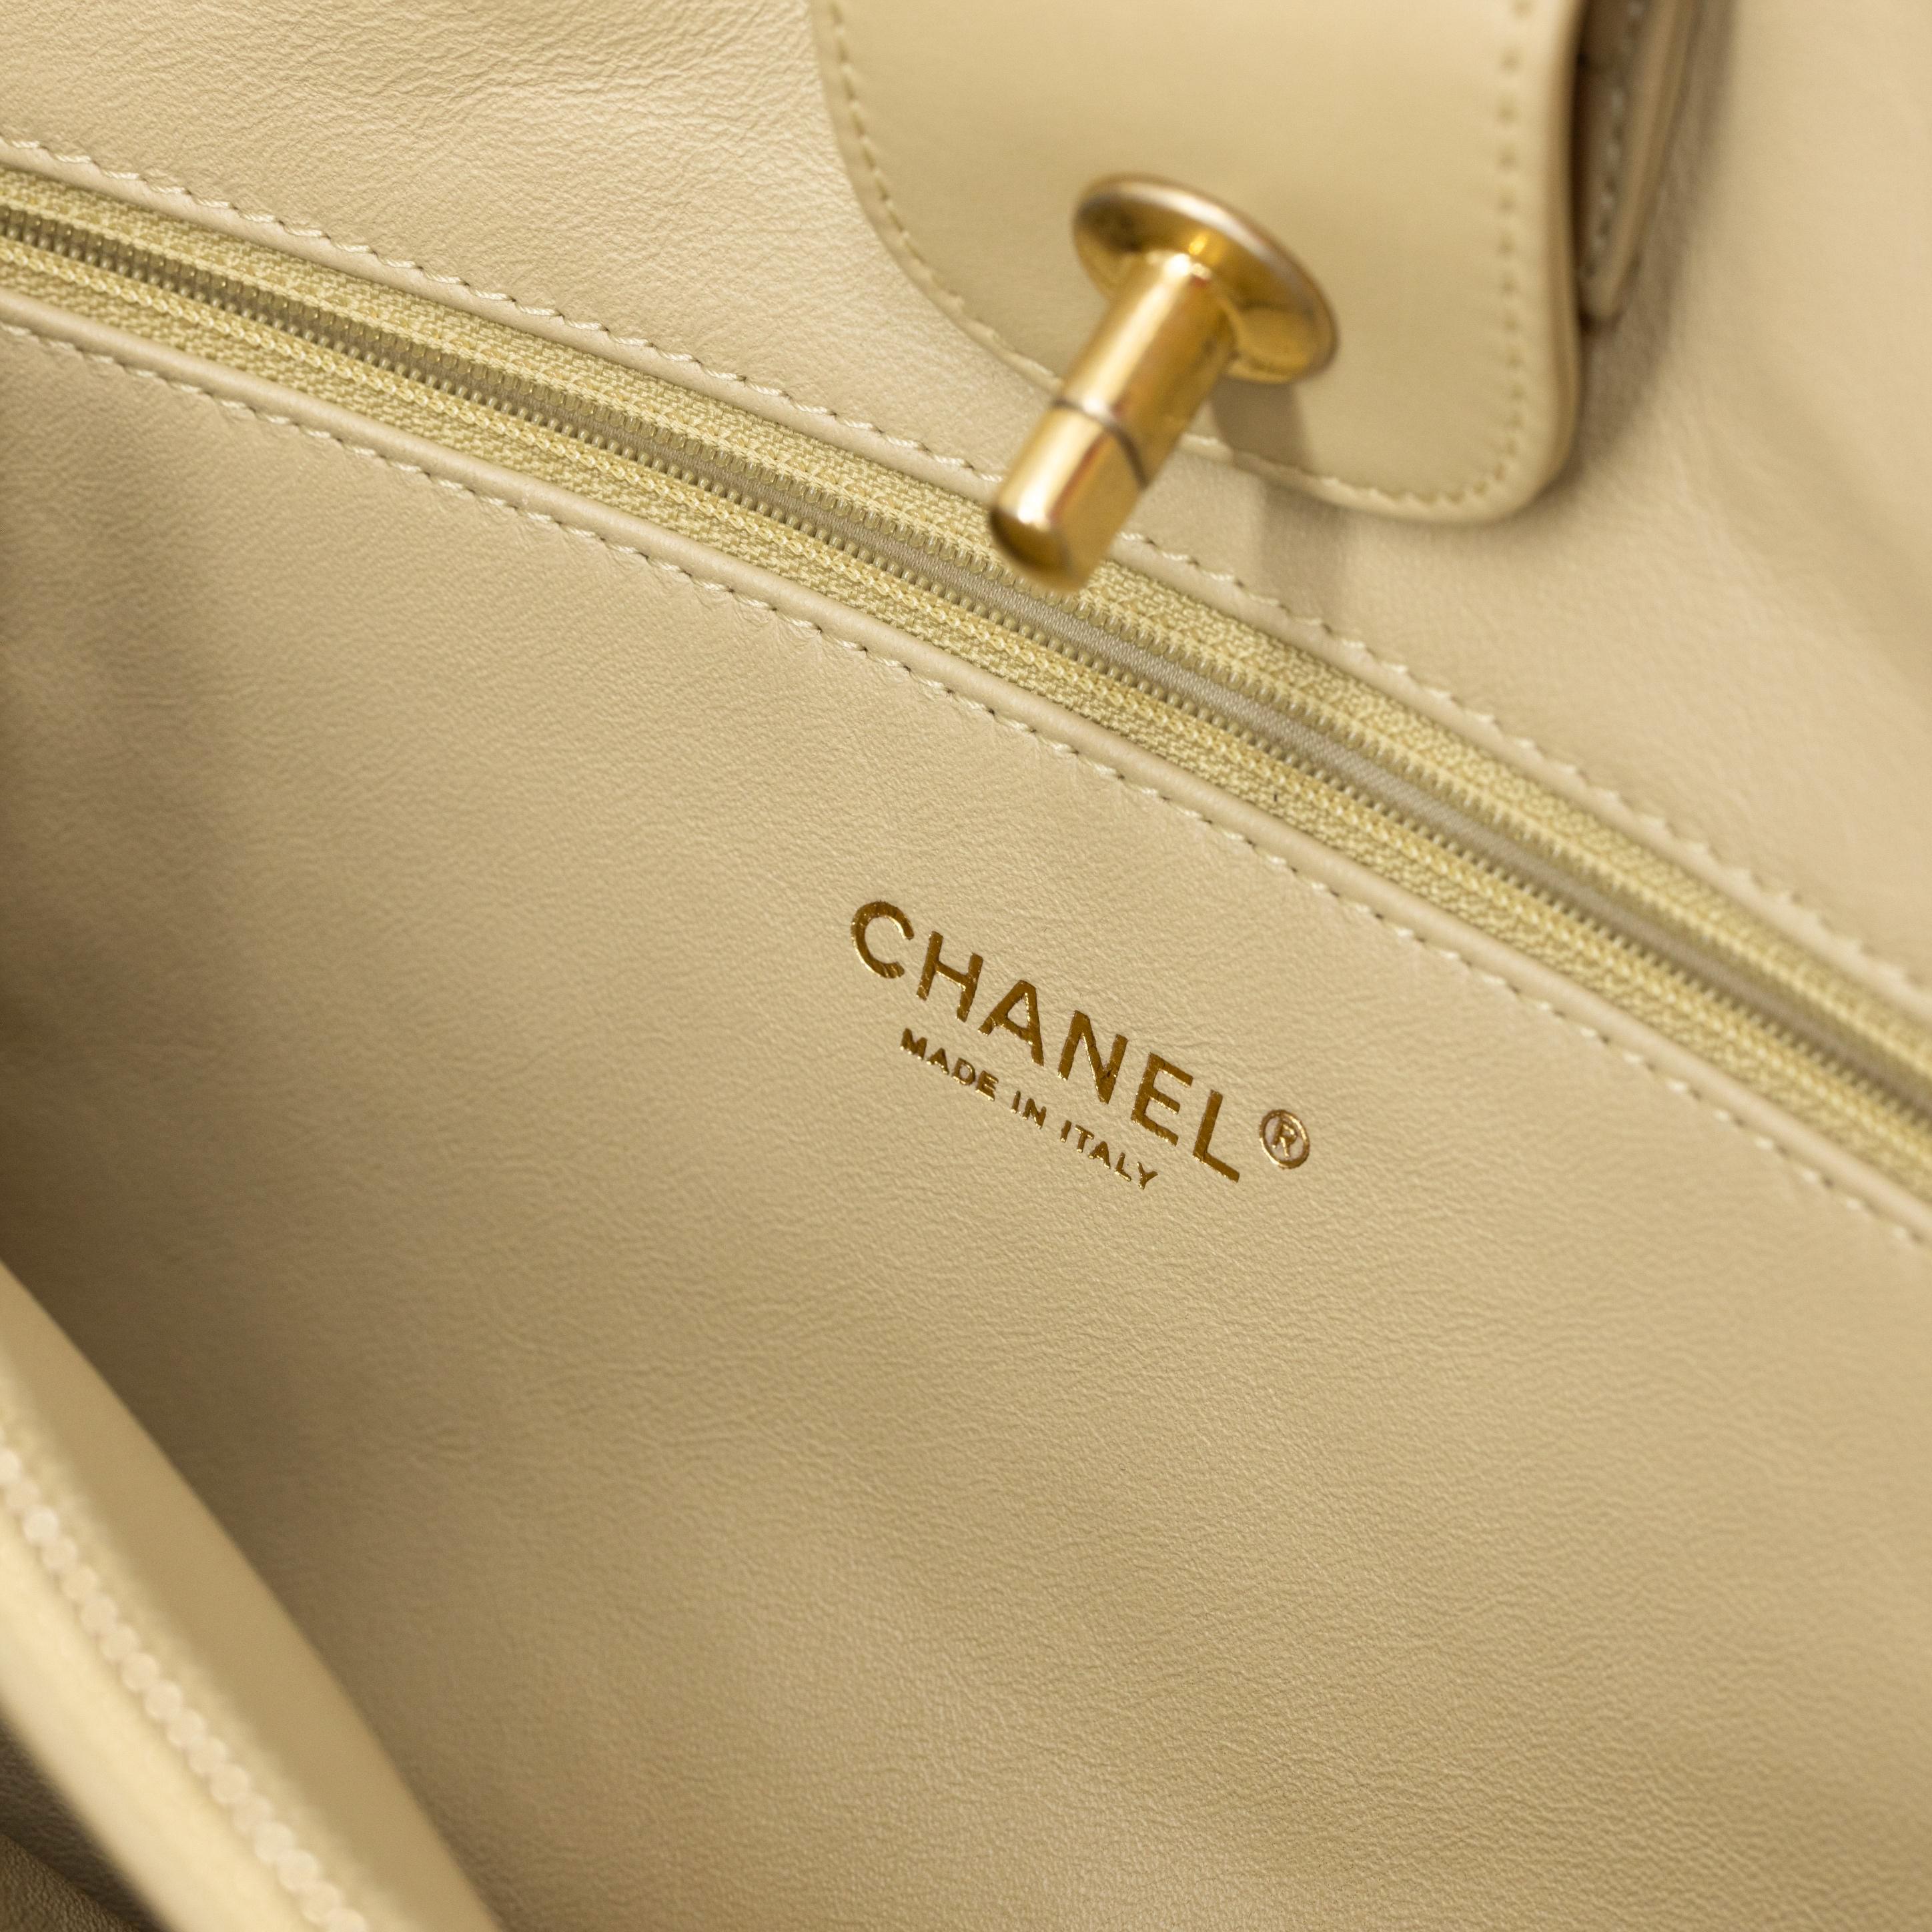 Chanel Quilted Beige Calfskin Thin City Accordion Turnlock Large Tote Bag, 2013. 5